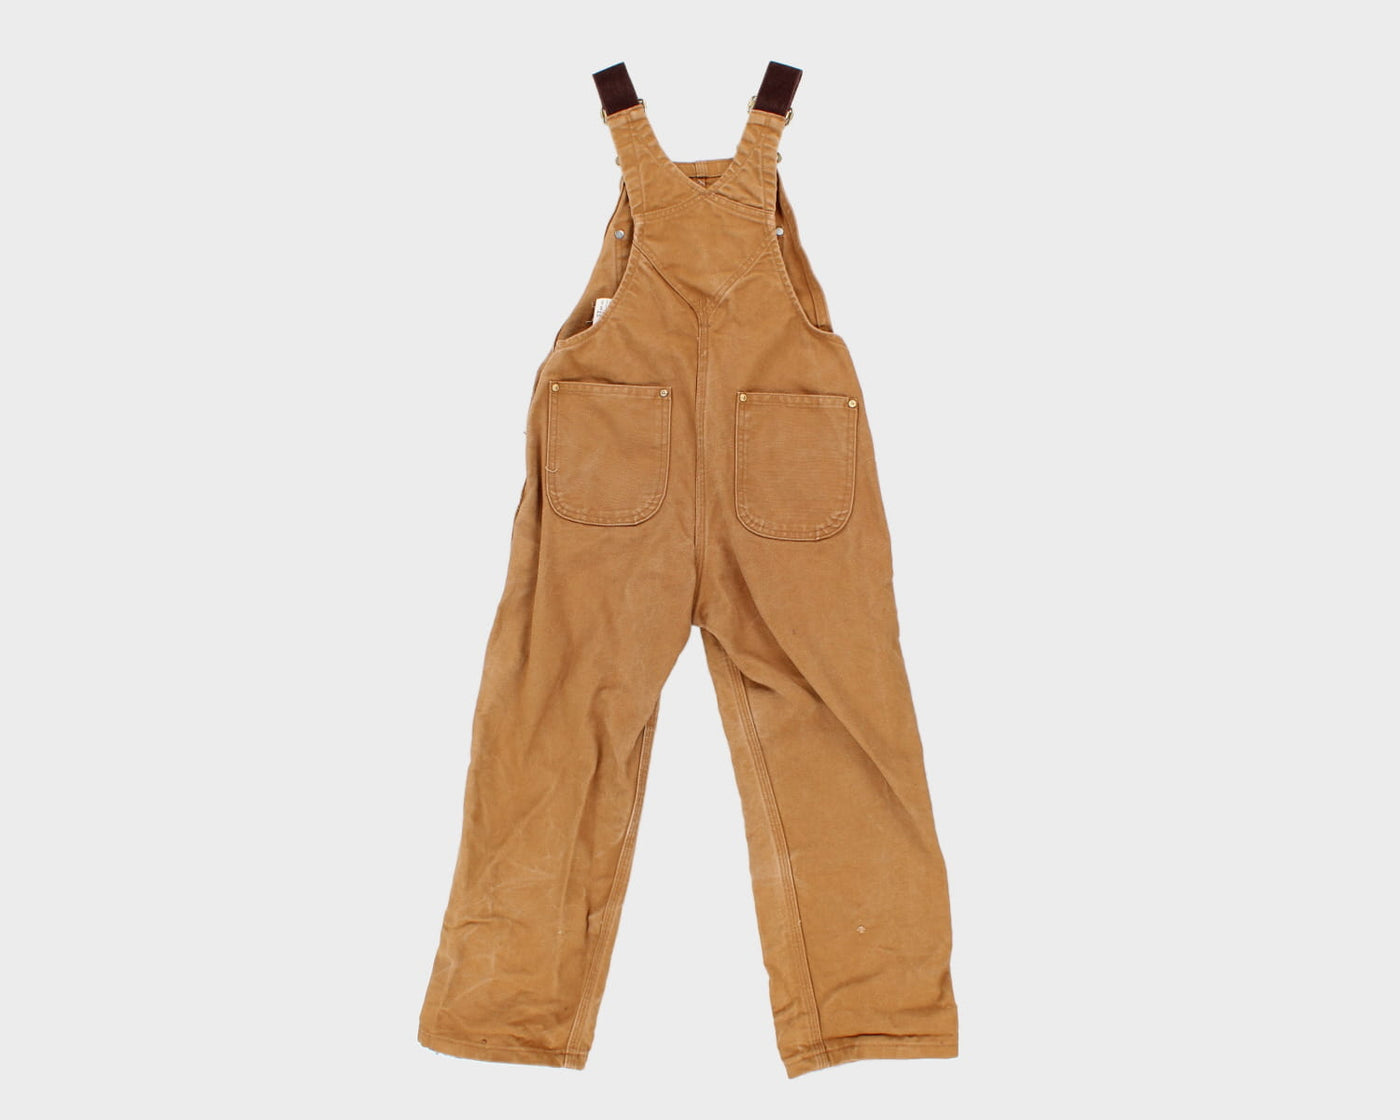 Kids Carhartt Dungarees Youth 8